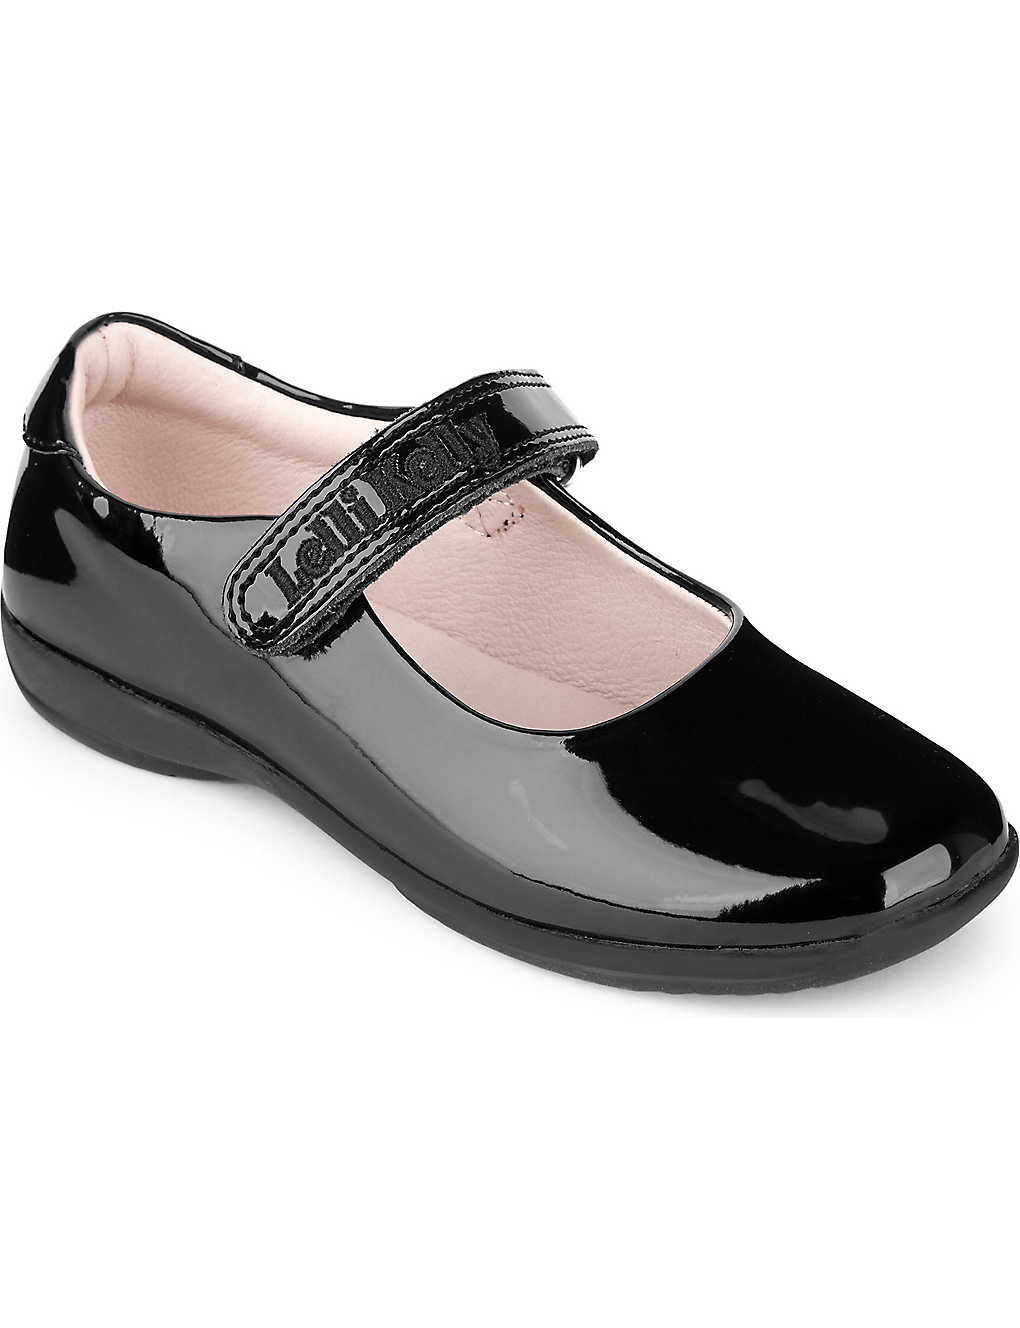 Etch Beam Kids patent leather school shoes 6-10 years Selfridges & Co Girls Shoes Flat Shoes School Shoes 